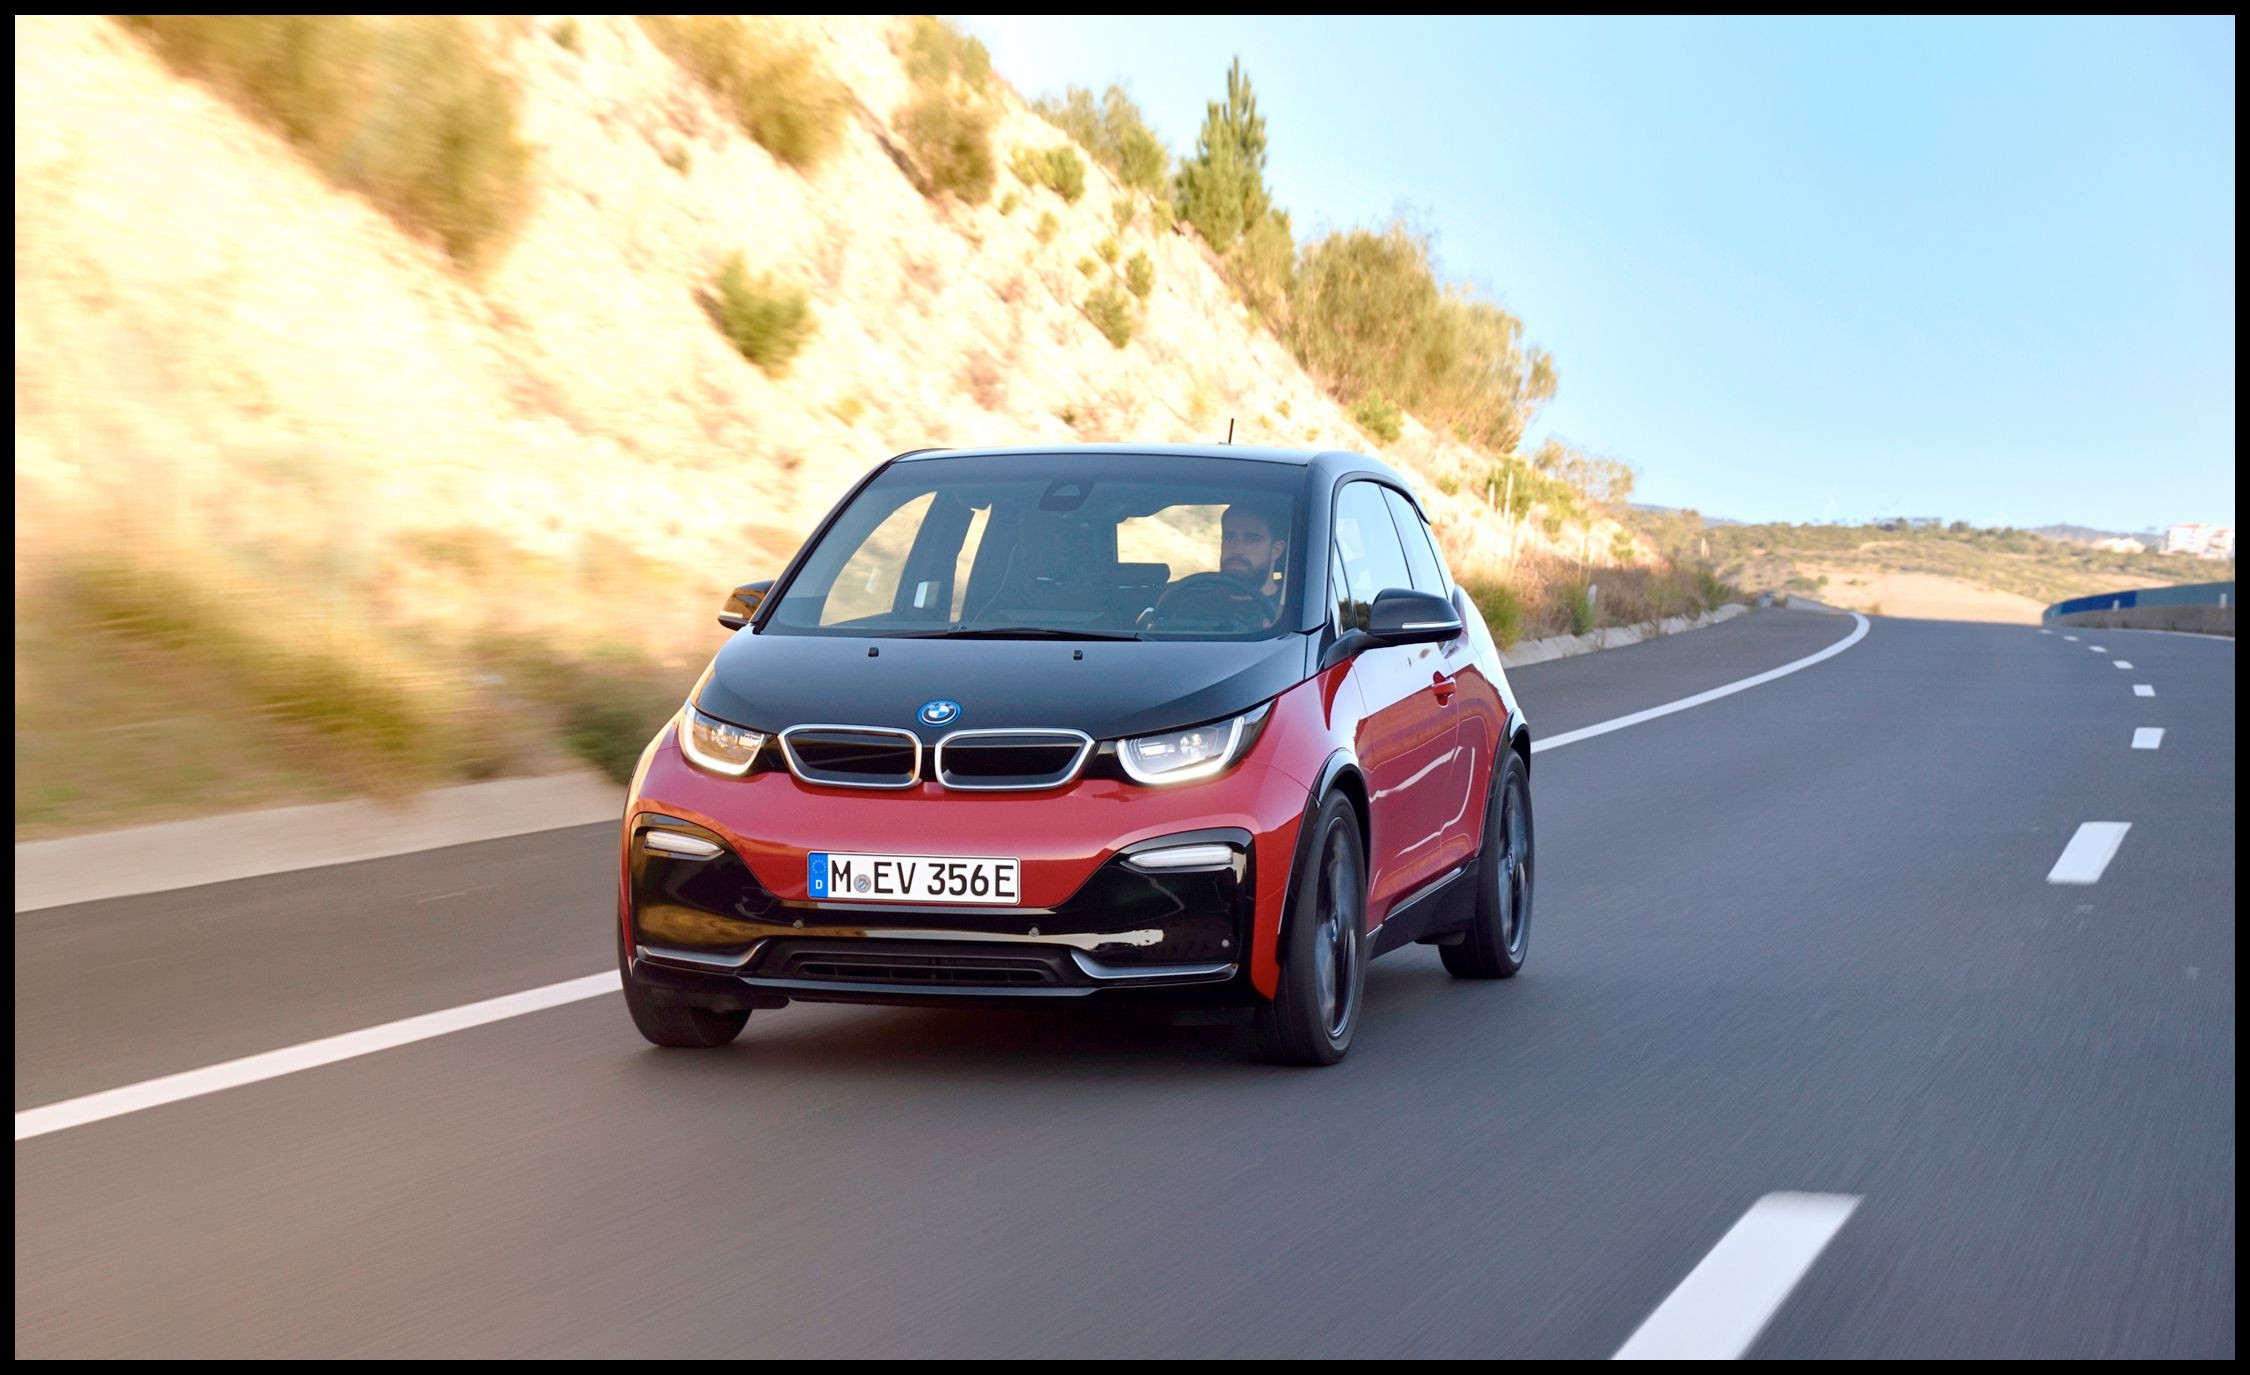 2019 Bmw I3 Battery Lovely Bmw I3 Reviews Bmw I3 Price S and Specs